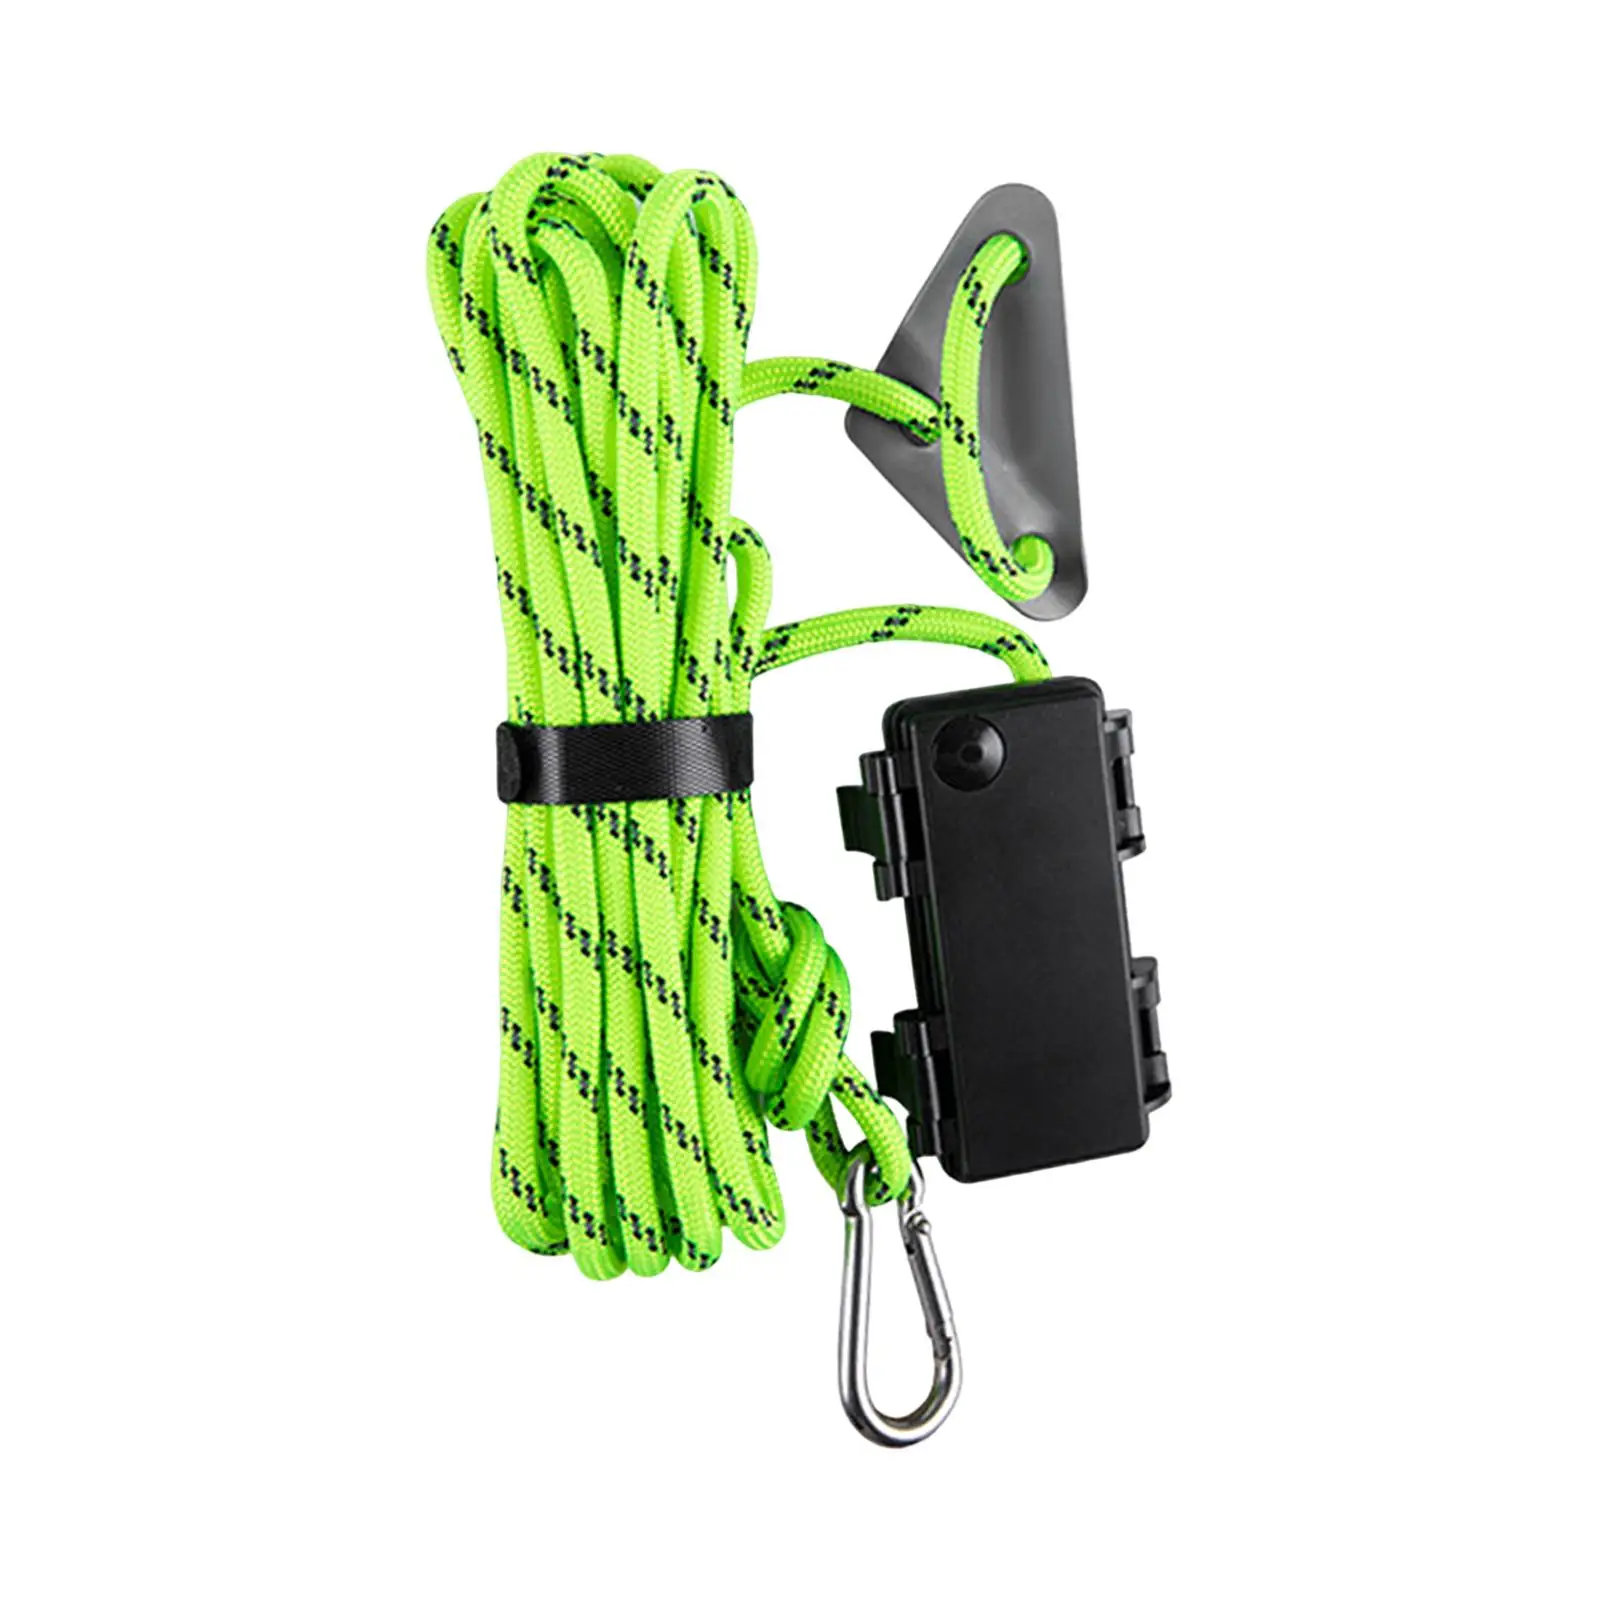 Guy Lines Lamp Tent Accessory LED Tent Rope for Backpacking Travel Climbing